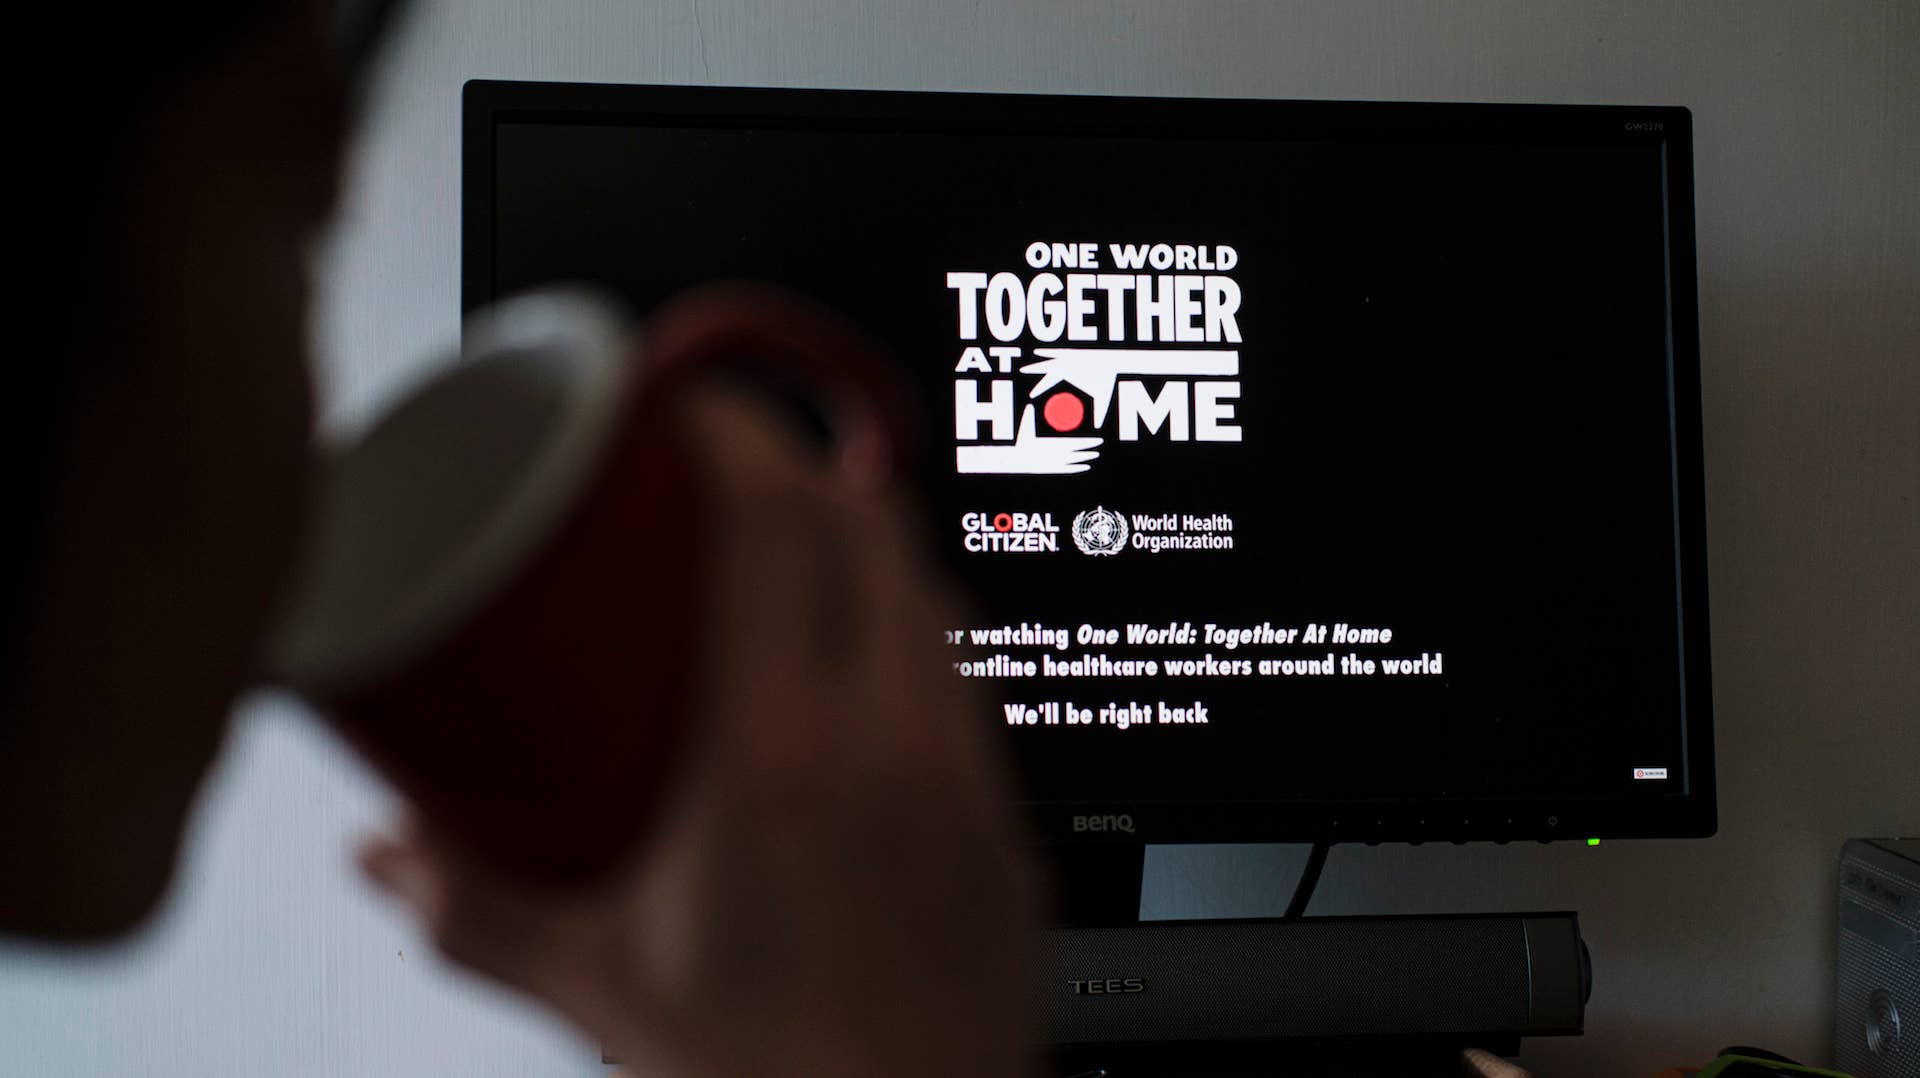 A person watches live streaming of One World Together At Home